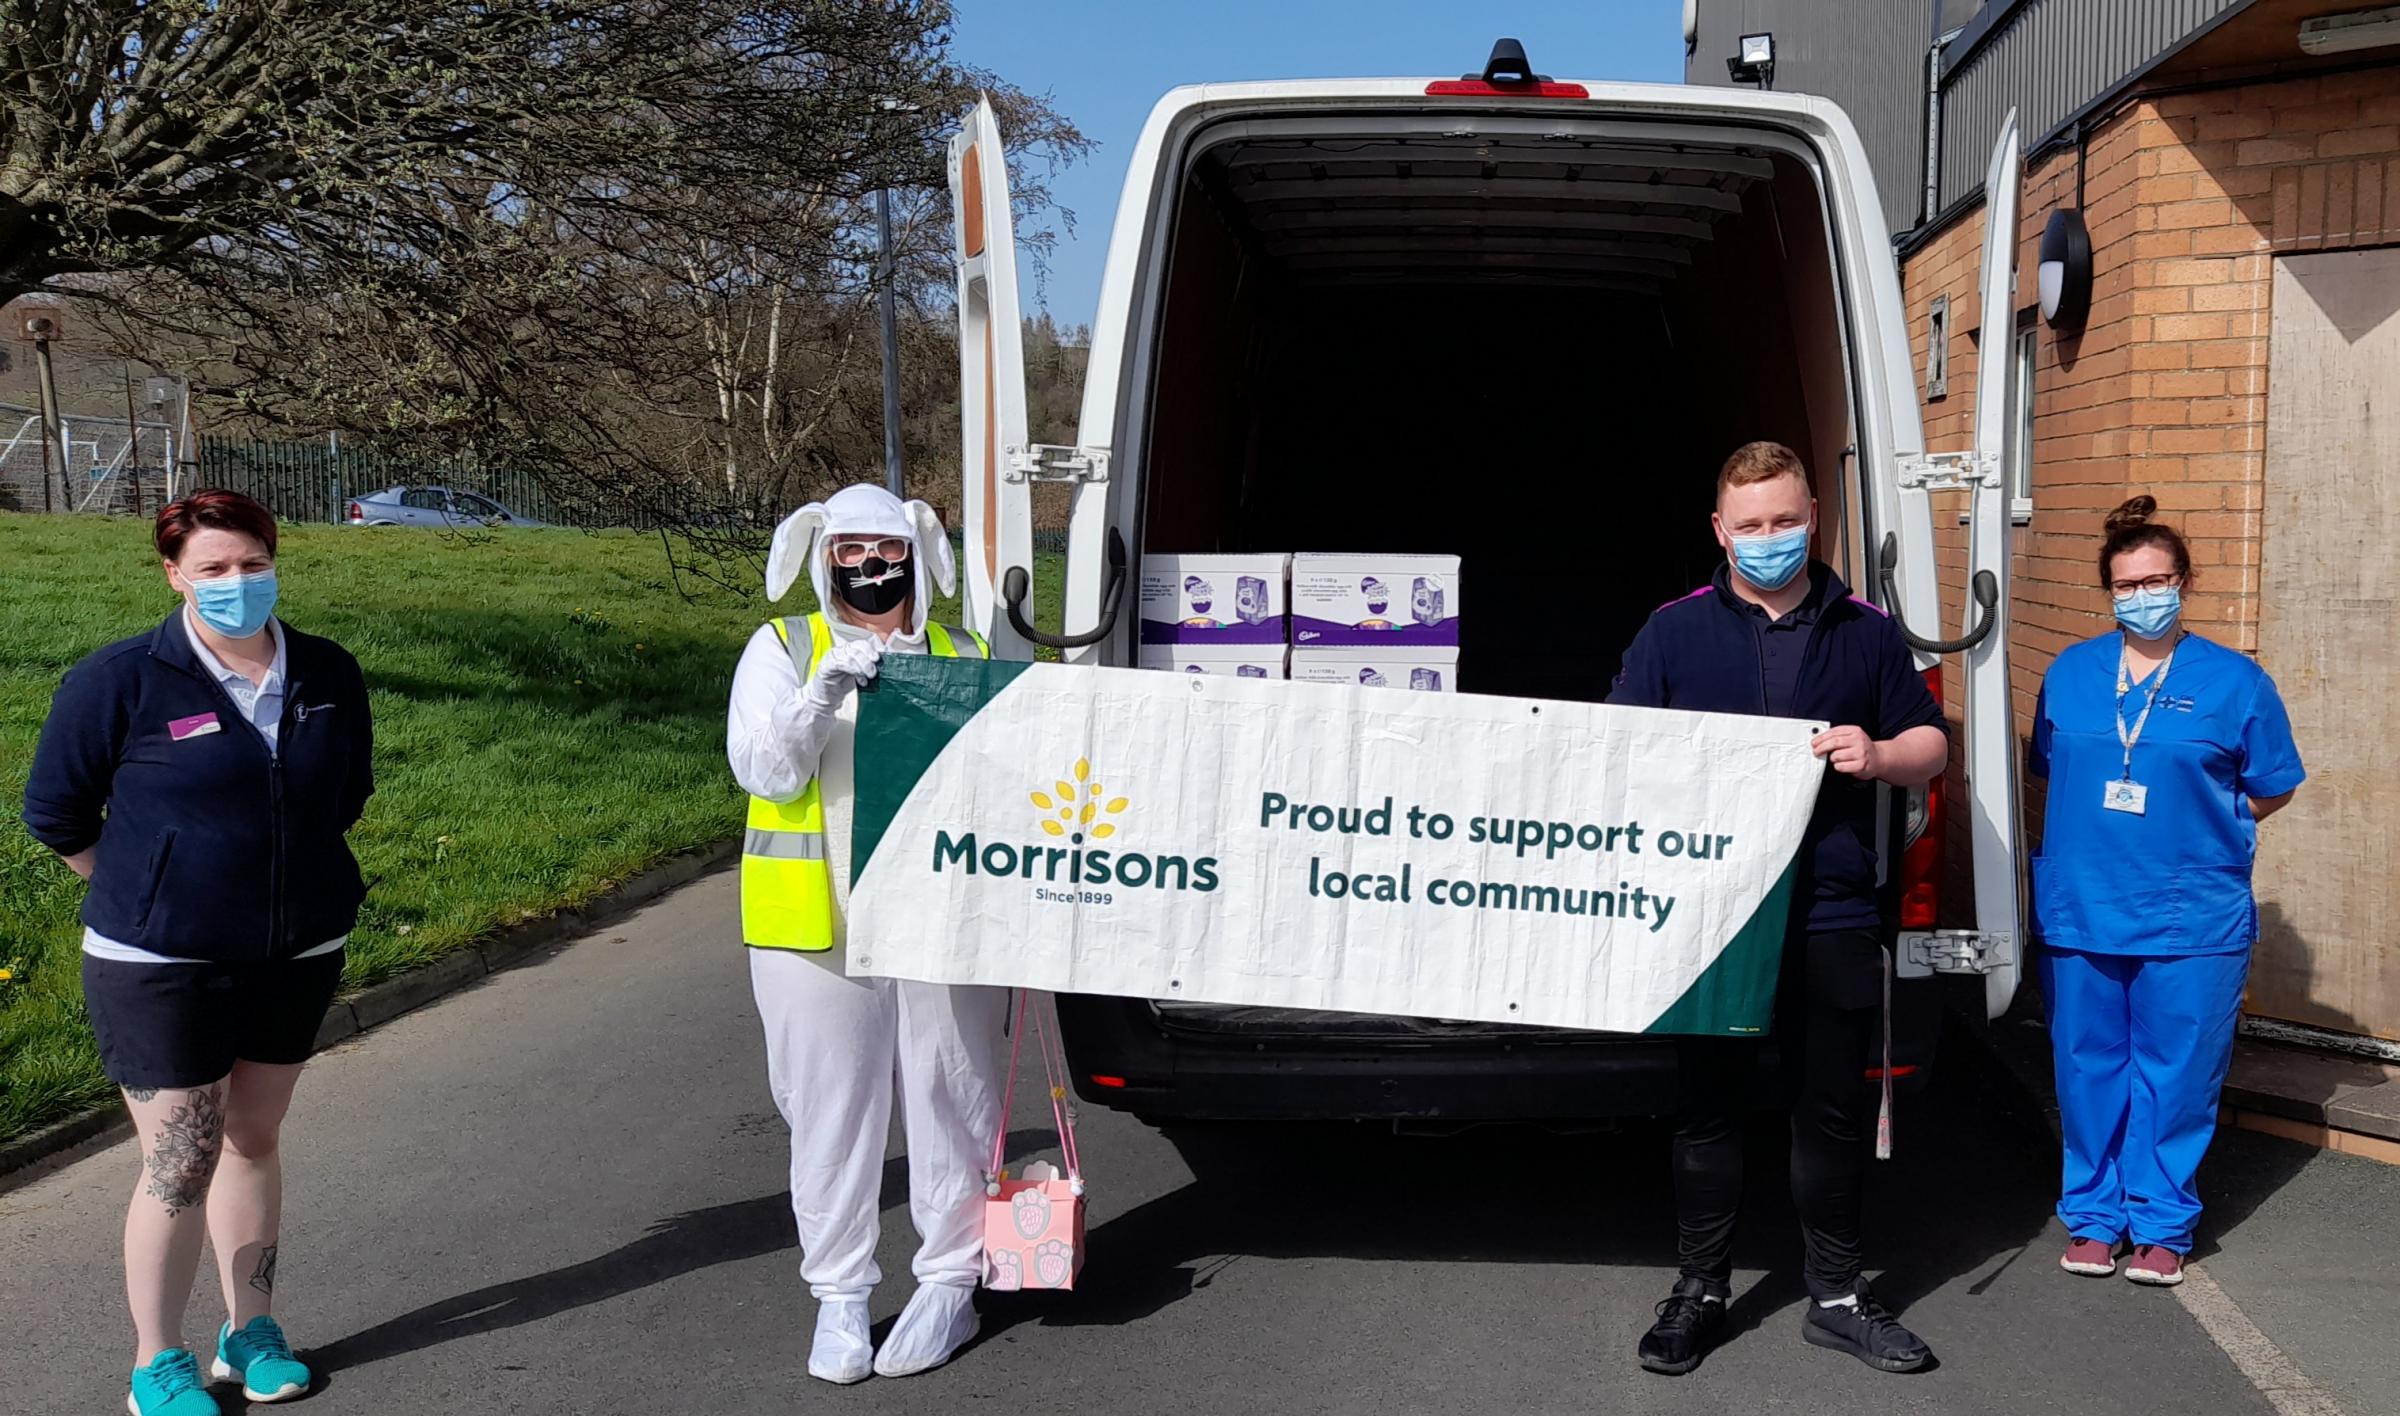 Staff from Morrisons supermarket in Newtown delivered Easter eggs to volunteers at the Maldwyn Vaccination Centre in Newtown. Picture: Morrisons Newtown